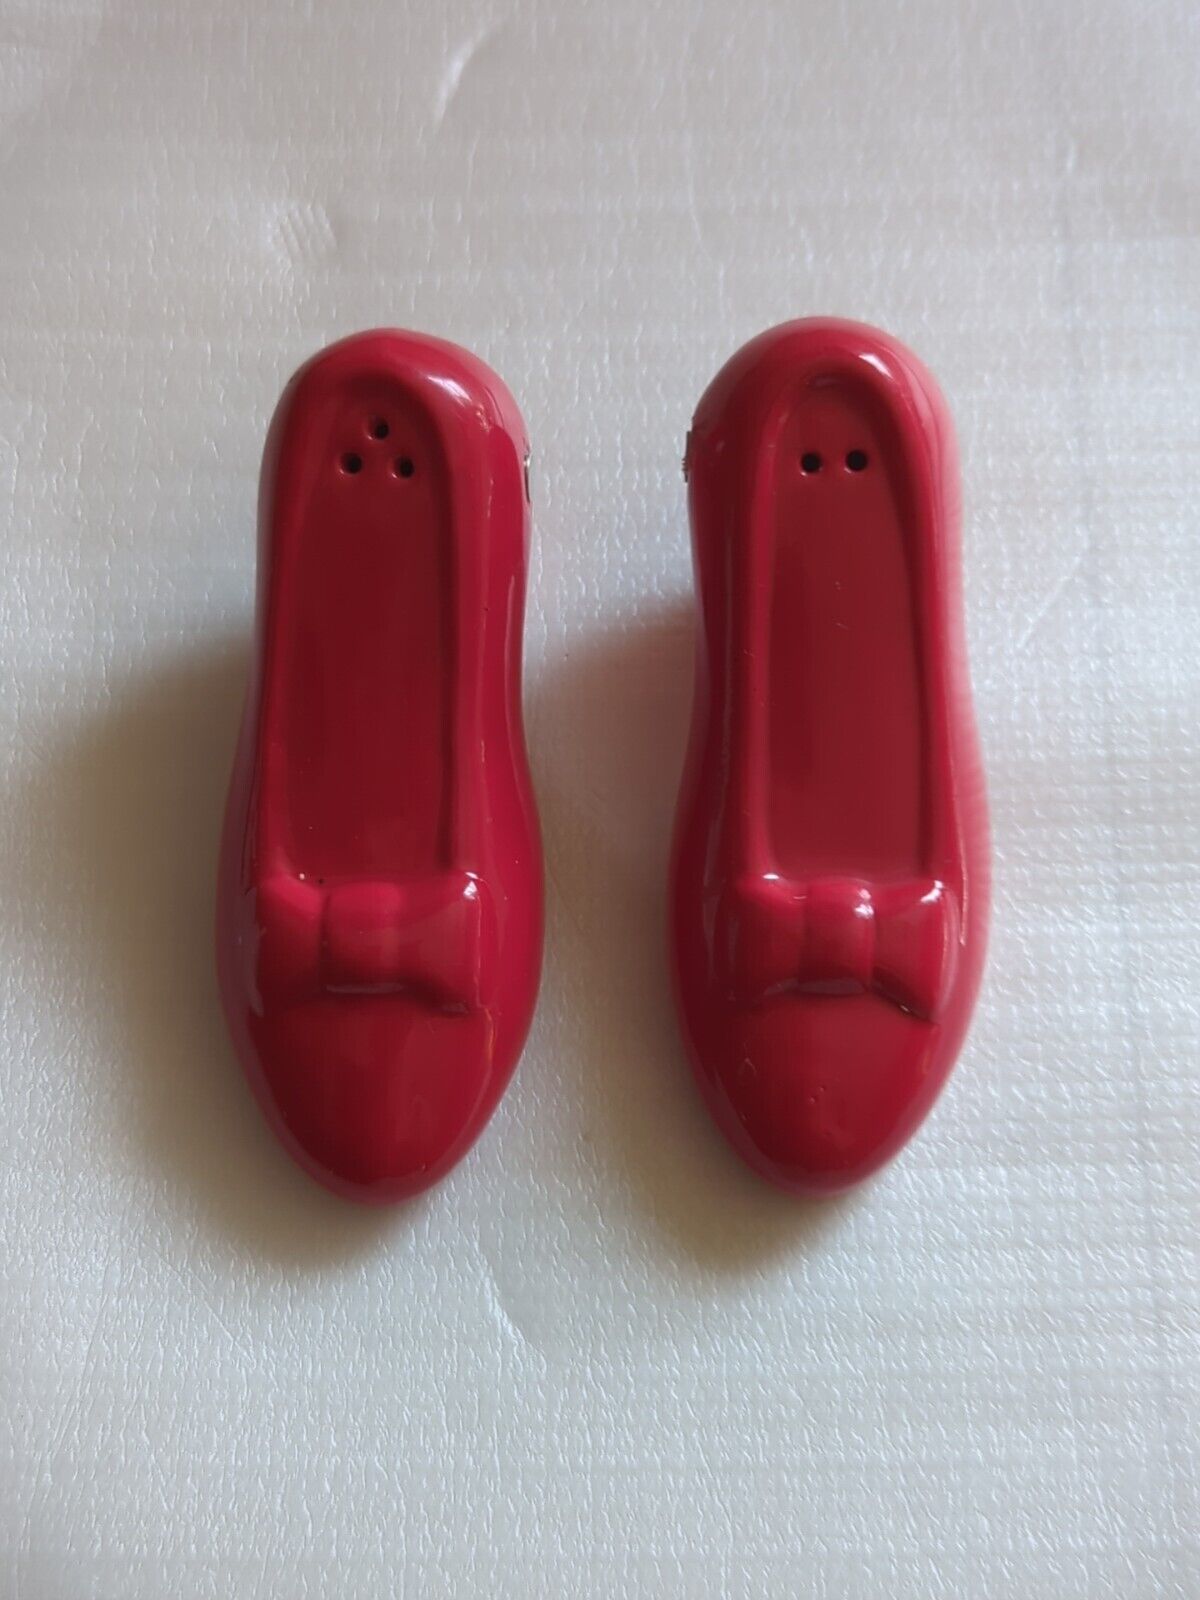 Vintage Salt And Pepper Shakers 1999, Ruby Red Slippers Turner Entertainment Co